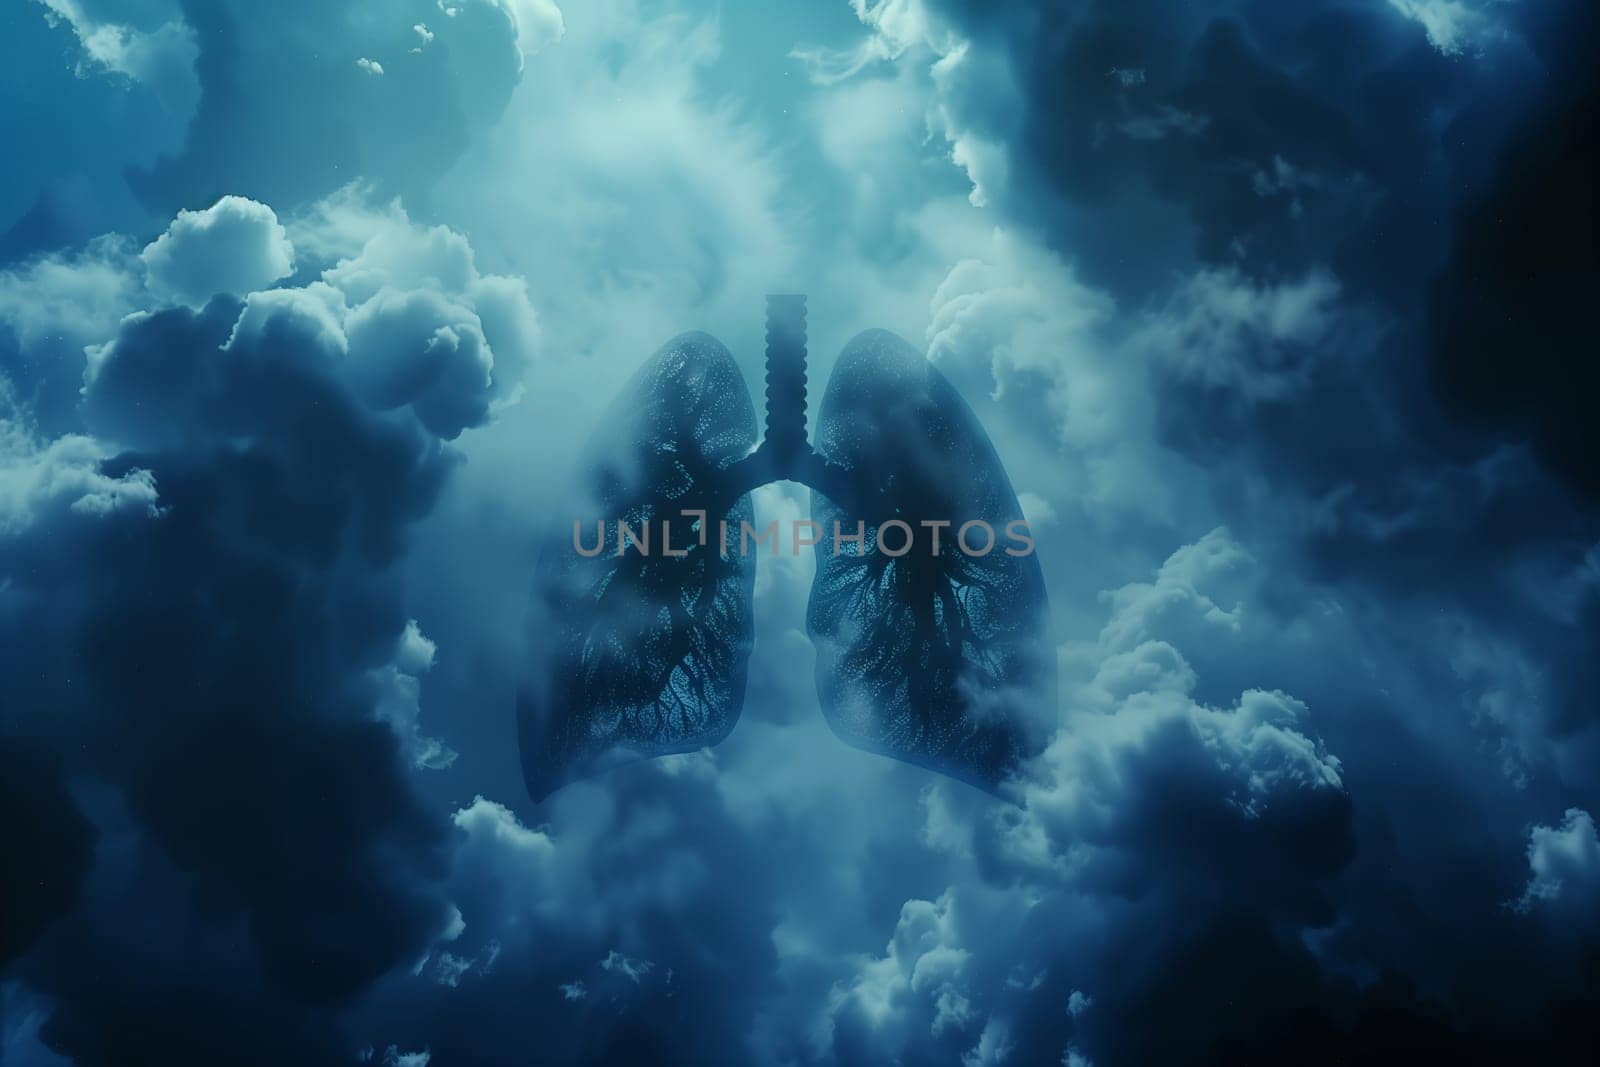 A picture of lungs in the clouds, blending with the sky and cumulus formations by richwolf